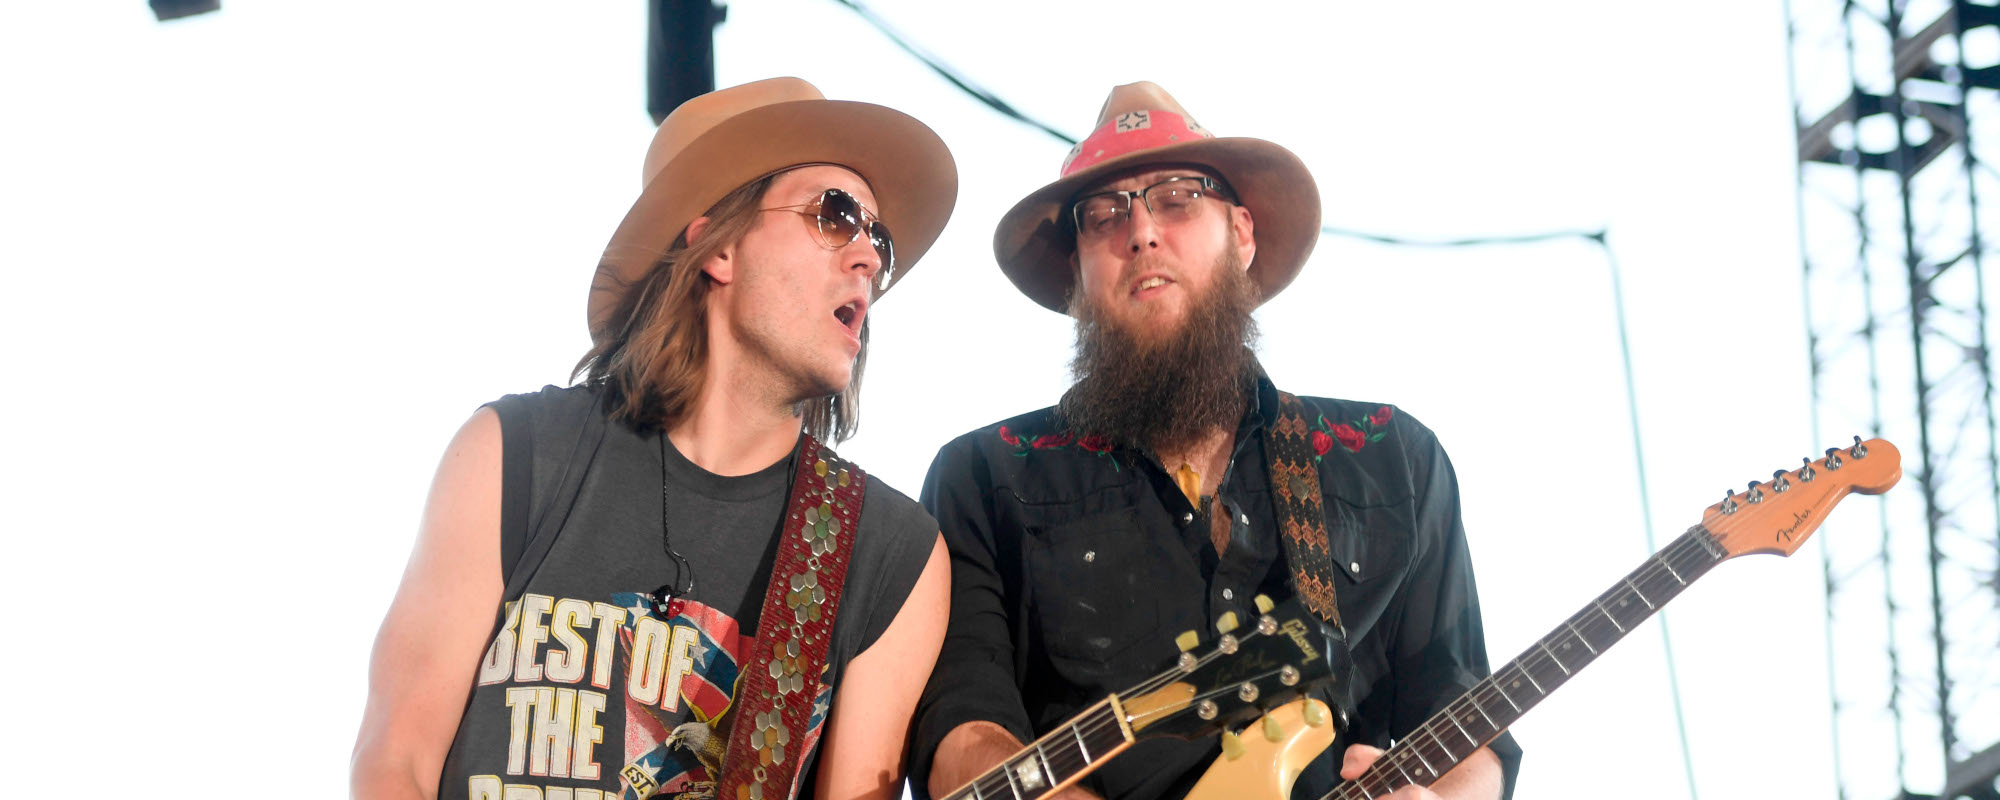 Whiskey Myers, Megan Moroney to Headline Greenville Country Music Festival: How To Get Tickets